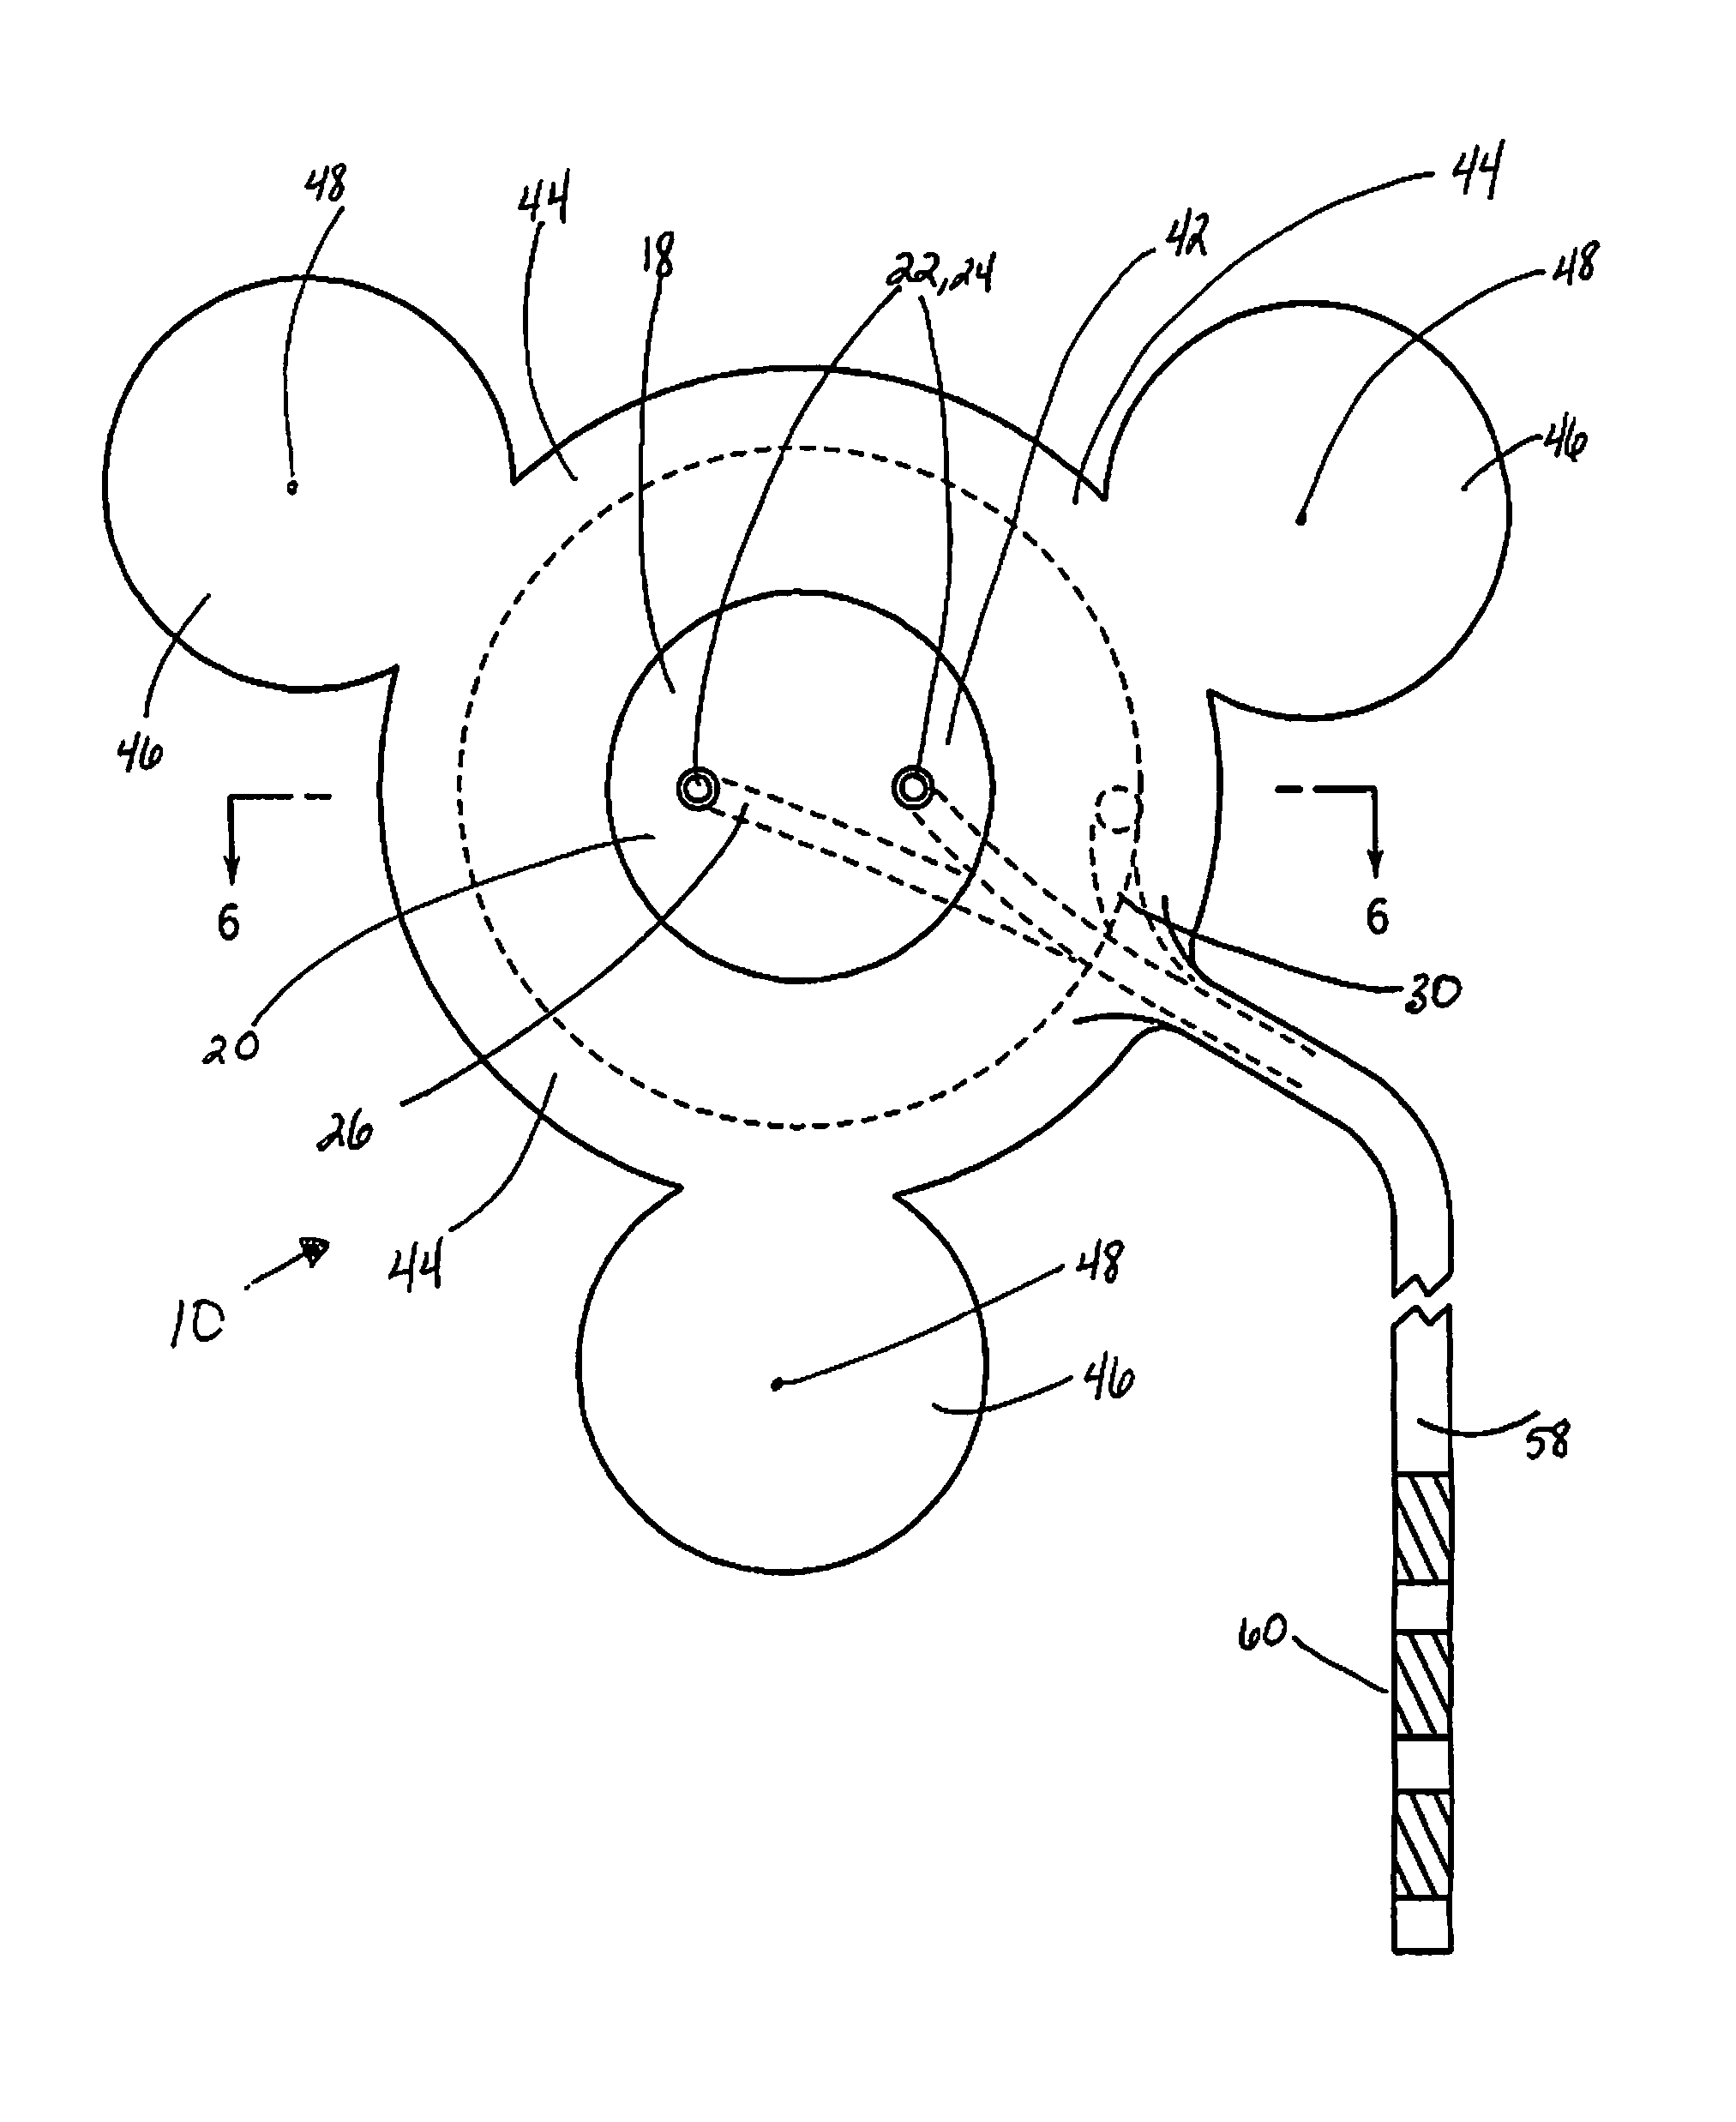 Intracranial sensing and monitoring device with macro and micro electrodes